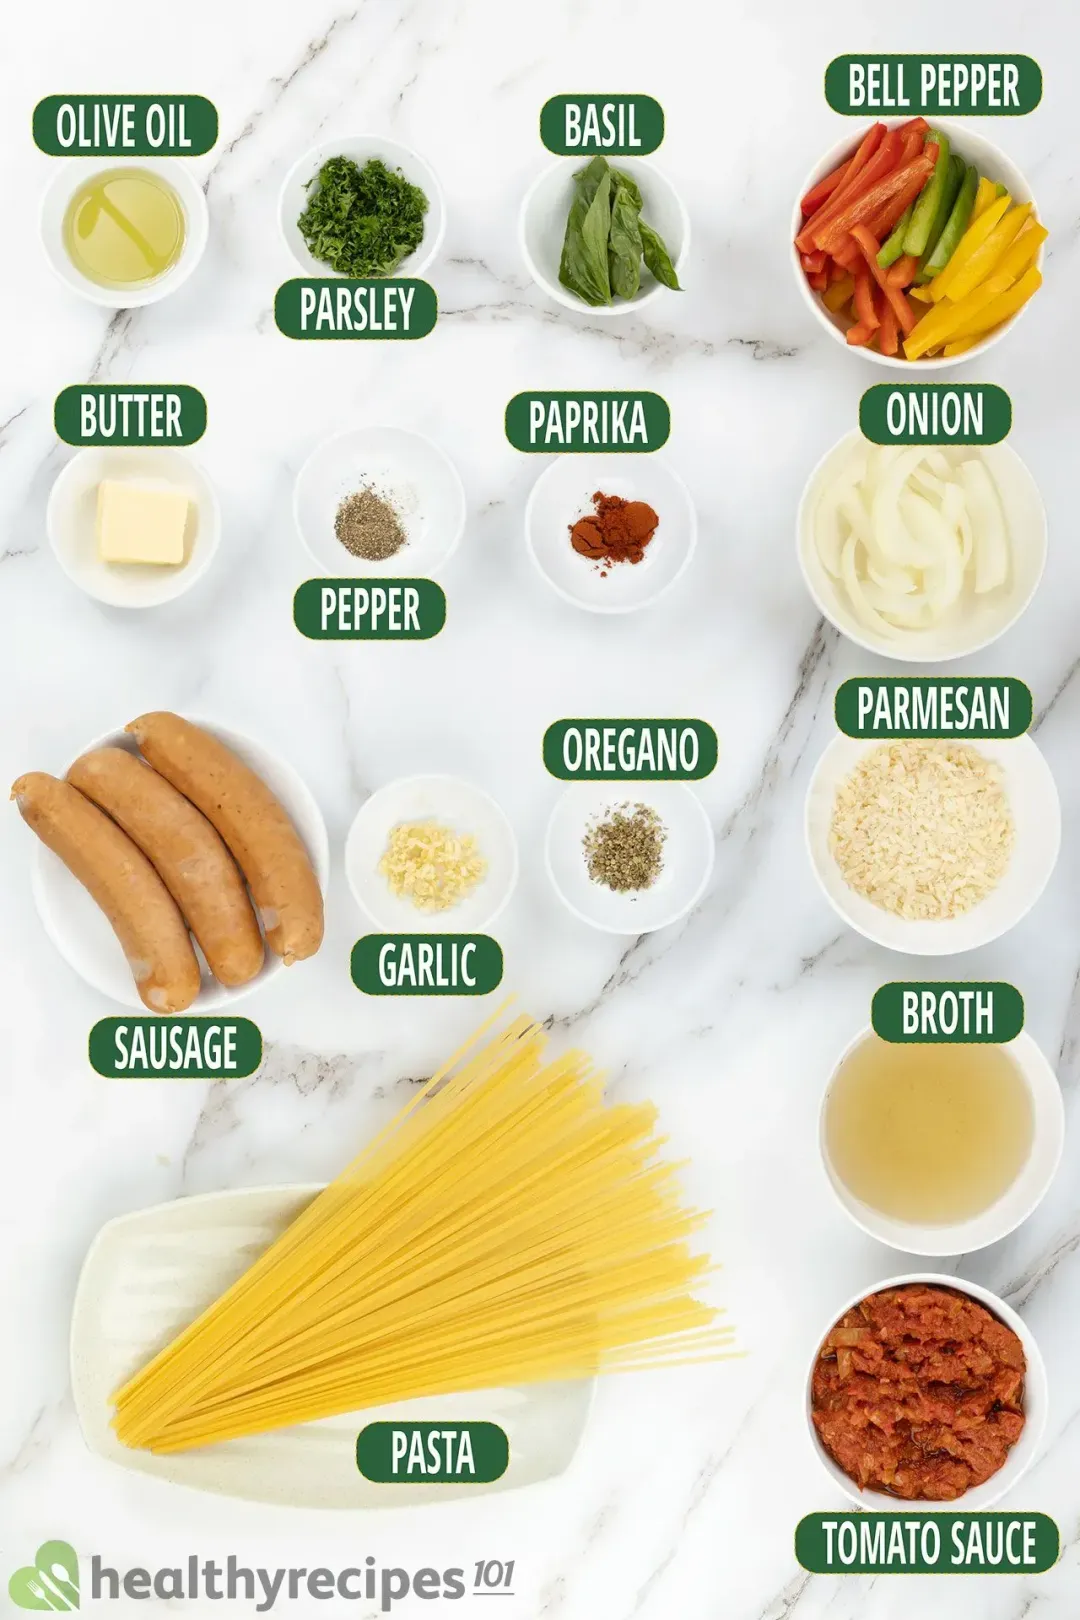 Types of Peppers and Sausage to Use